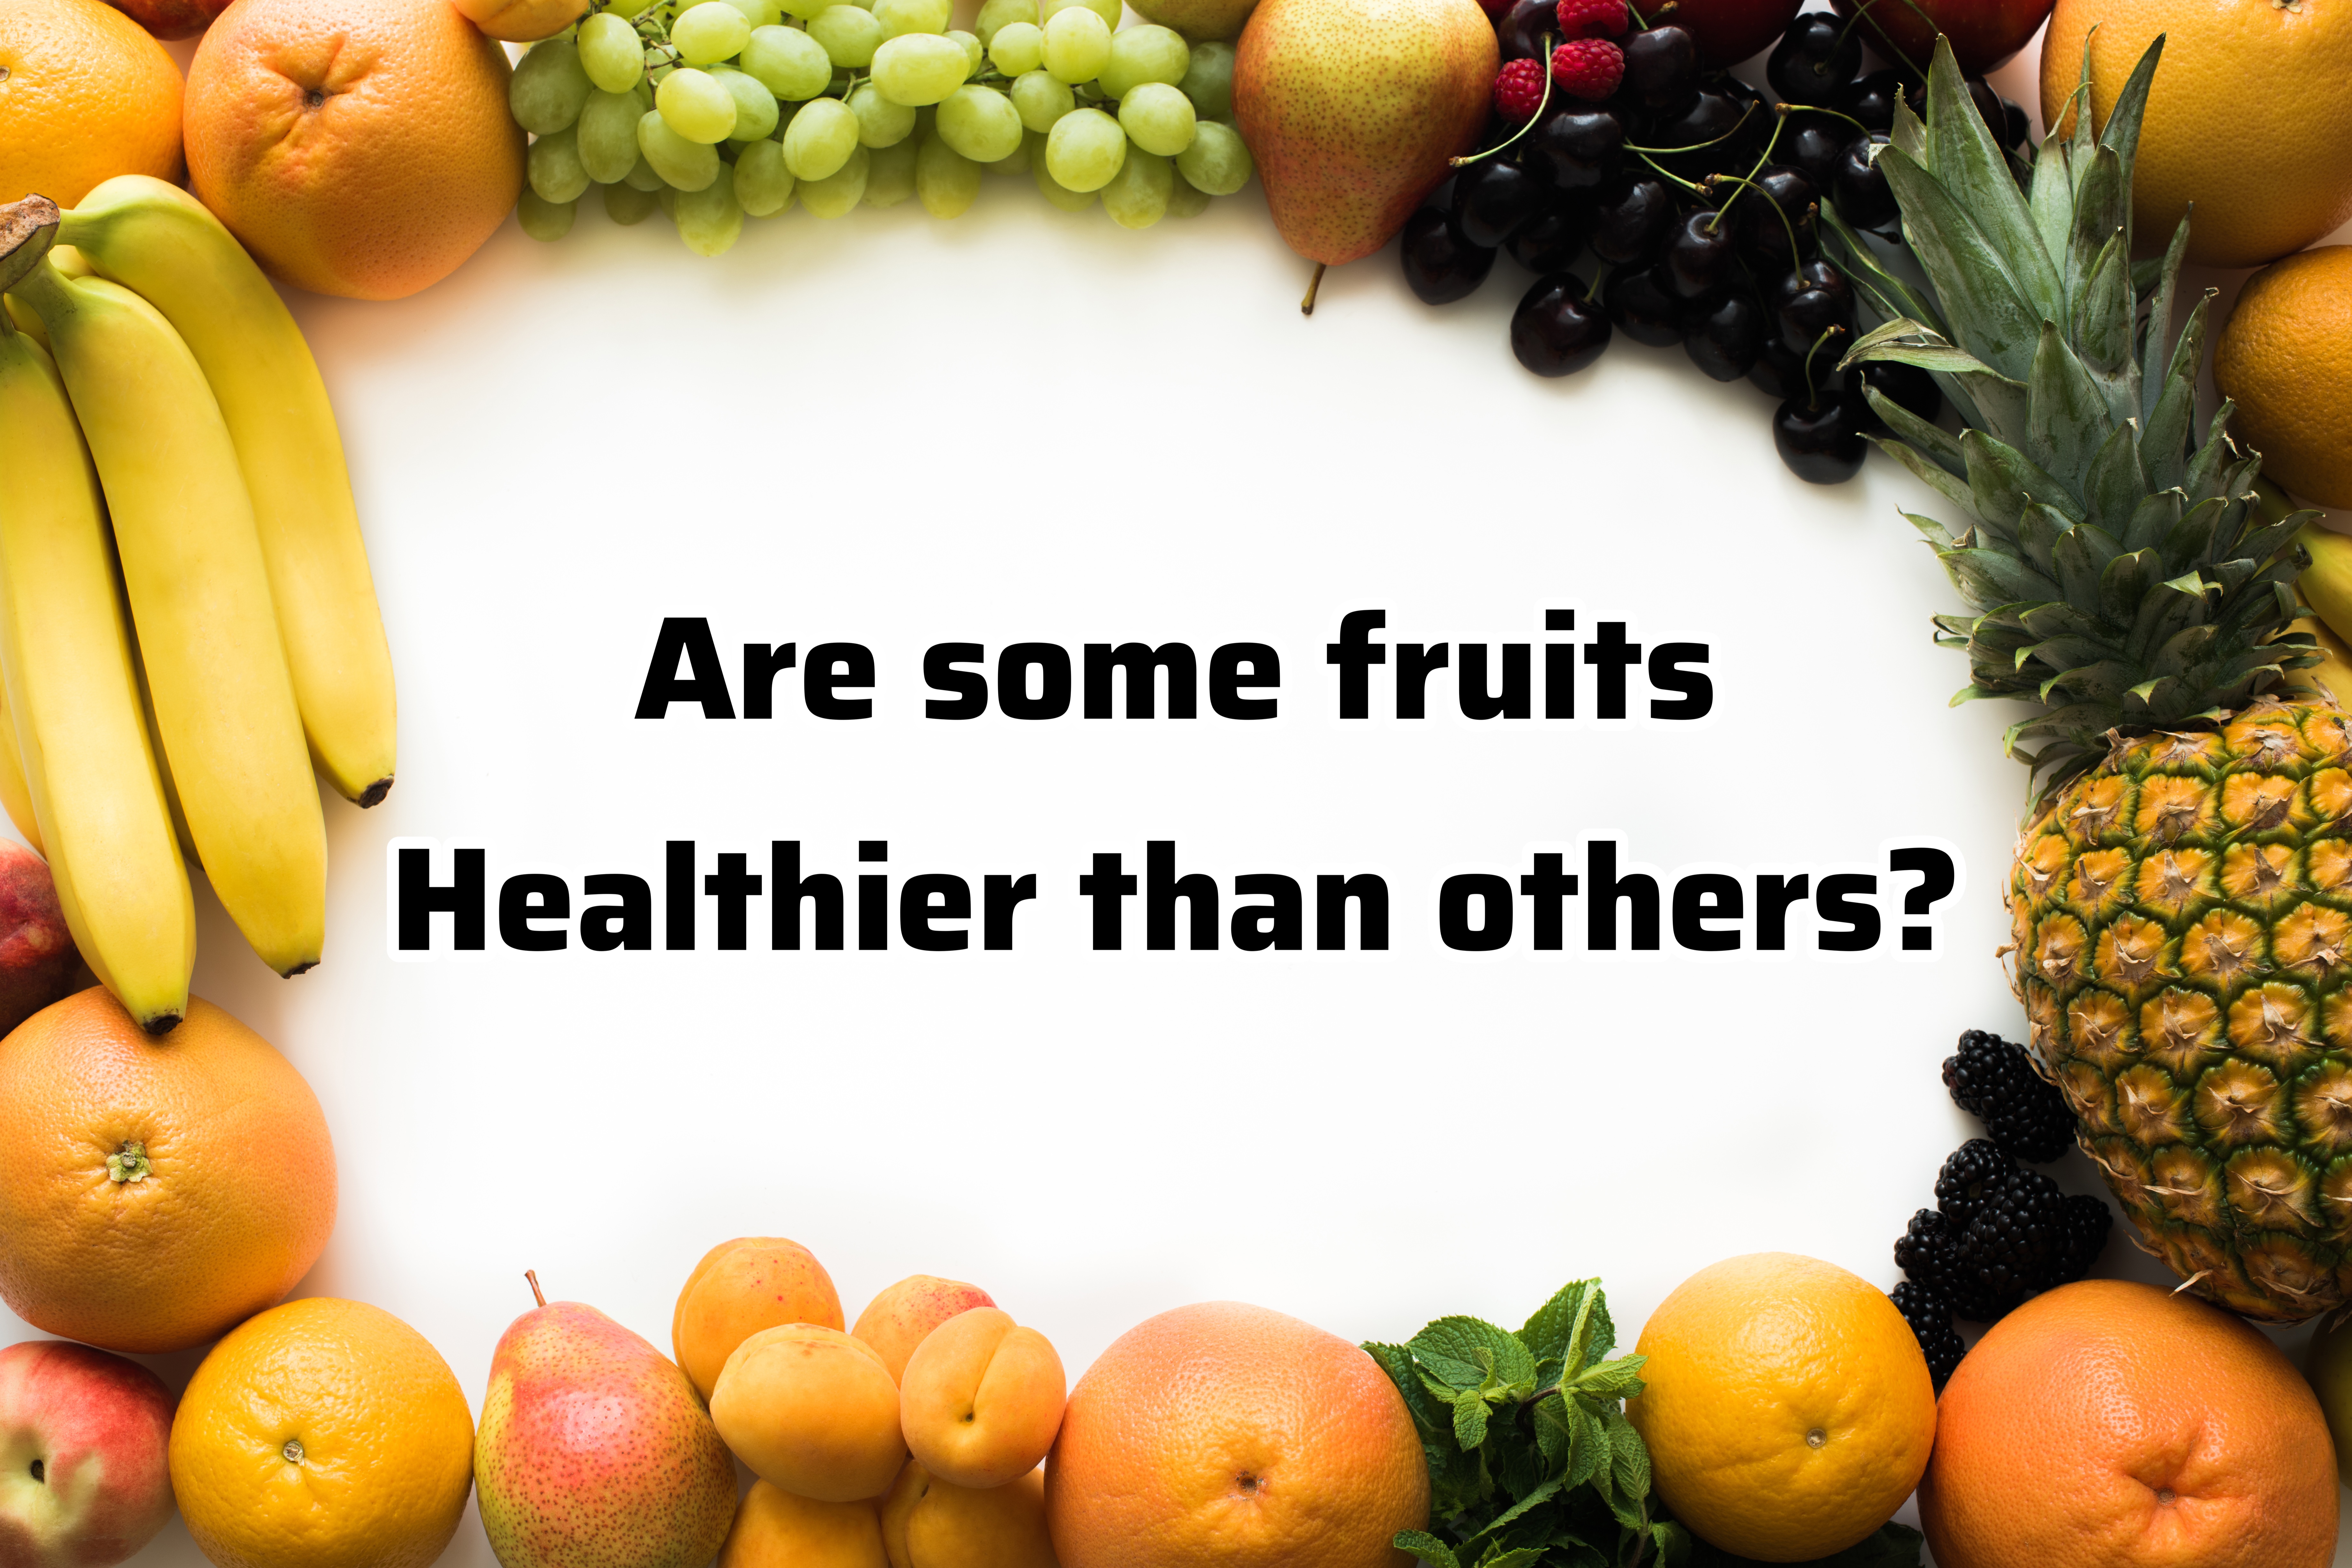 Are some fruits healthier than others?